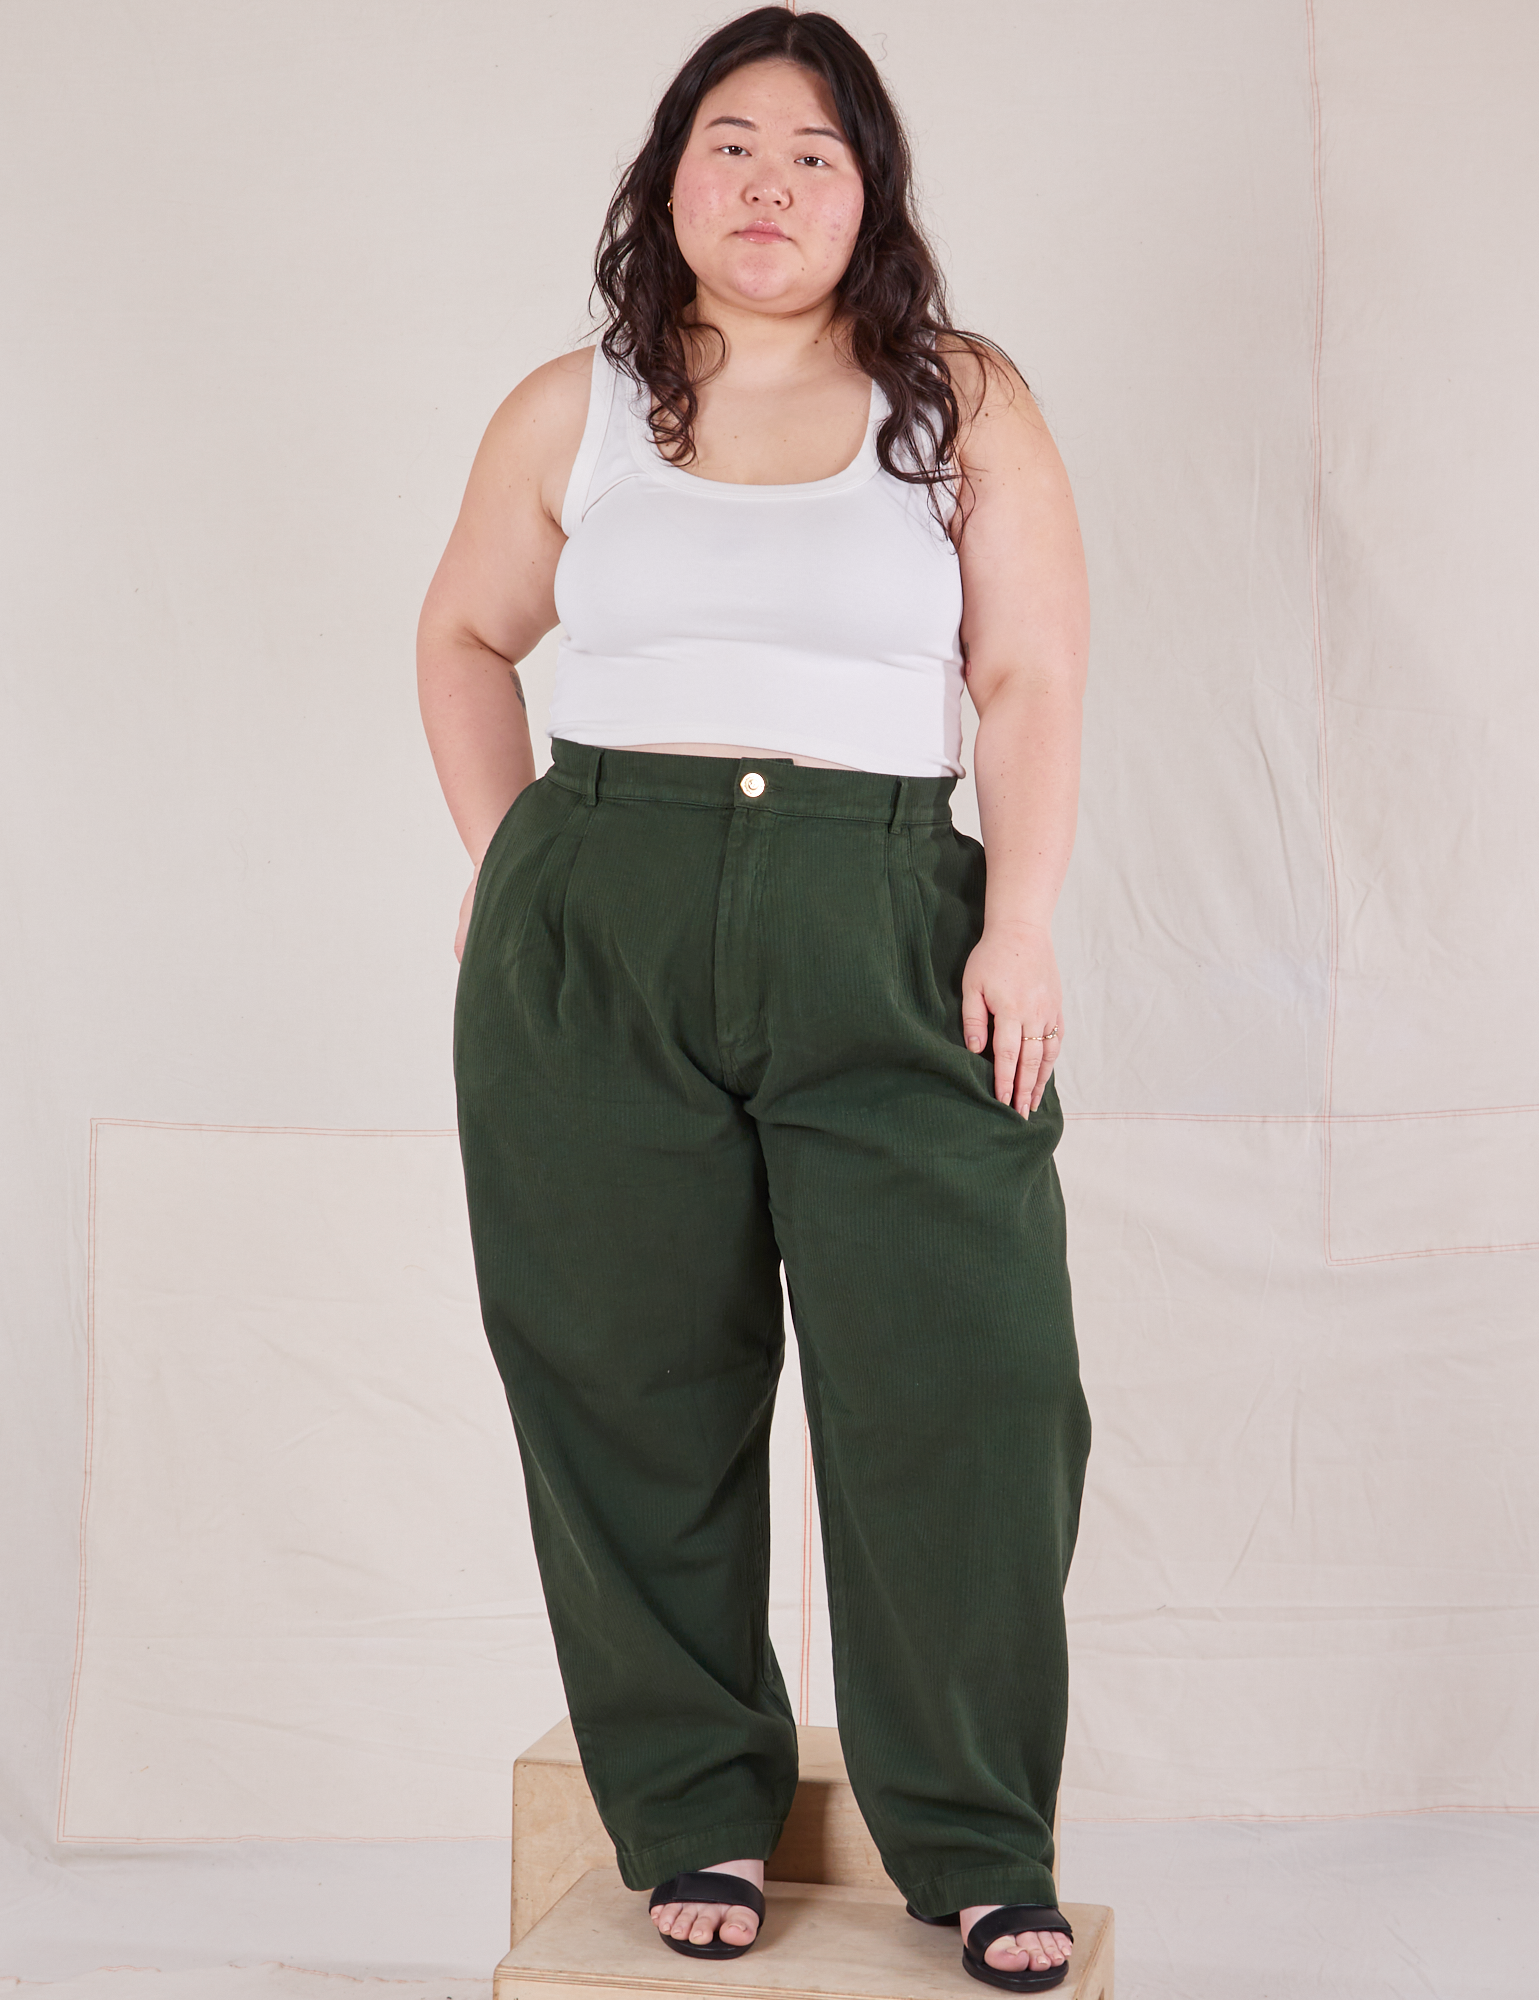 Ashley is 5&#39;7&quot; and wearing 1XL Heritage Trousers in Swamp Green and Cropped Tank Top in vintage tee off-white